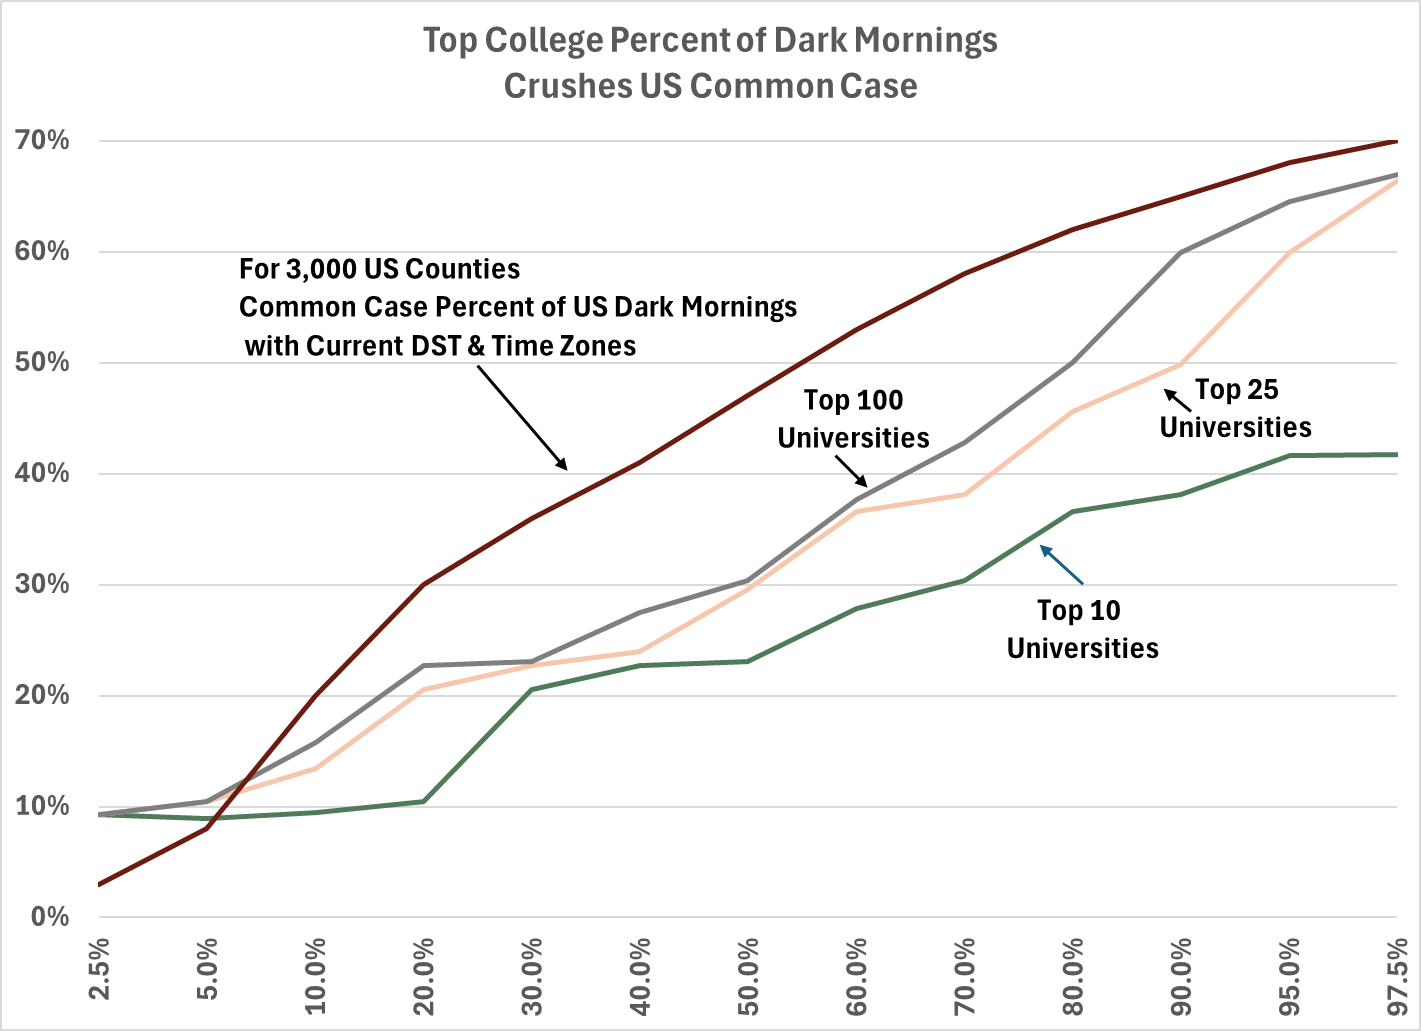 Top US College, appropriate percentage of darkness